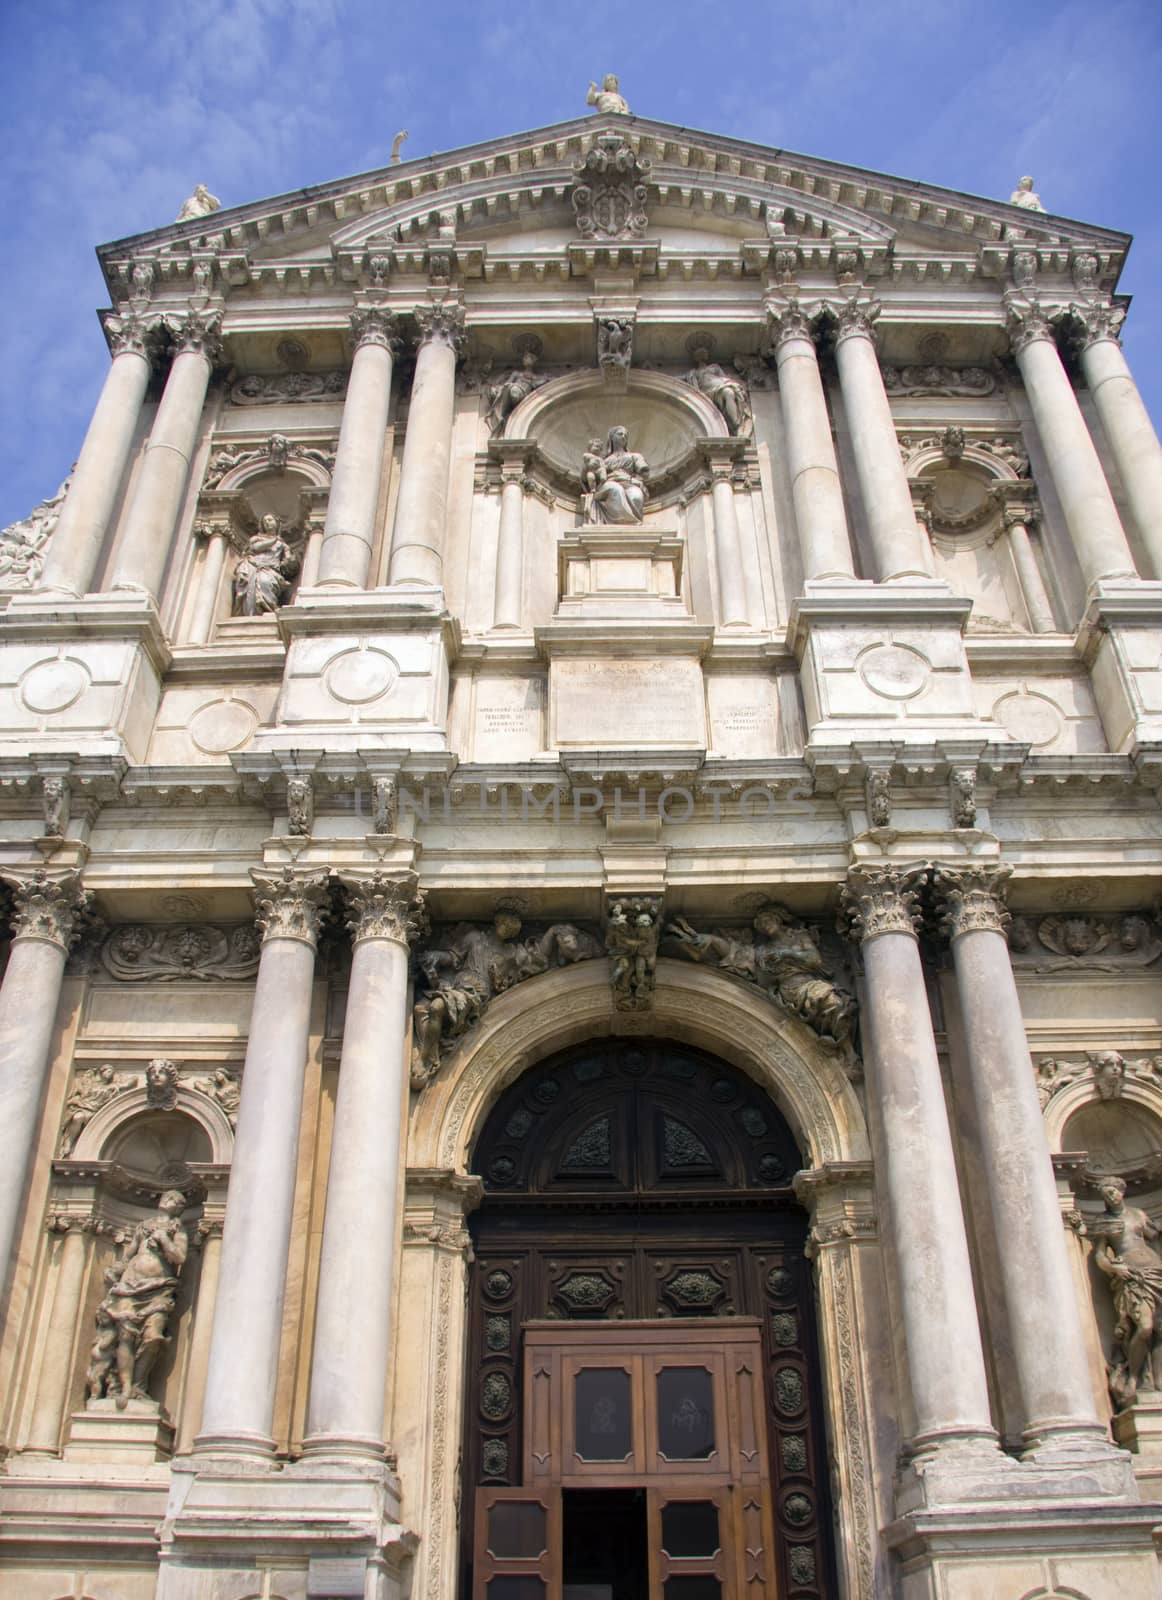 Front facade of the cathedral in Venice by fotoecho